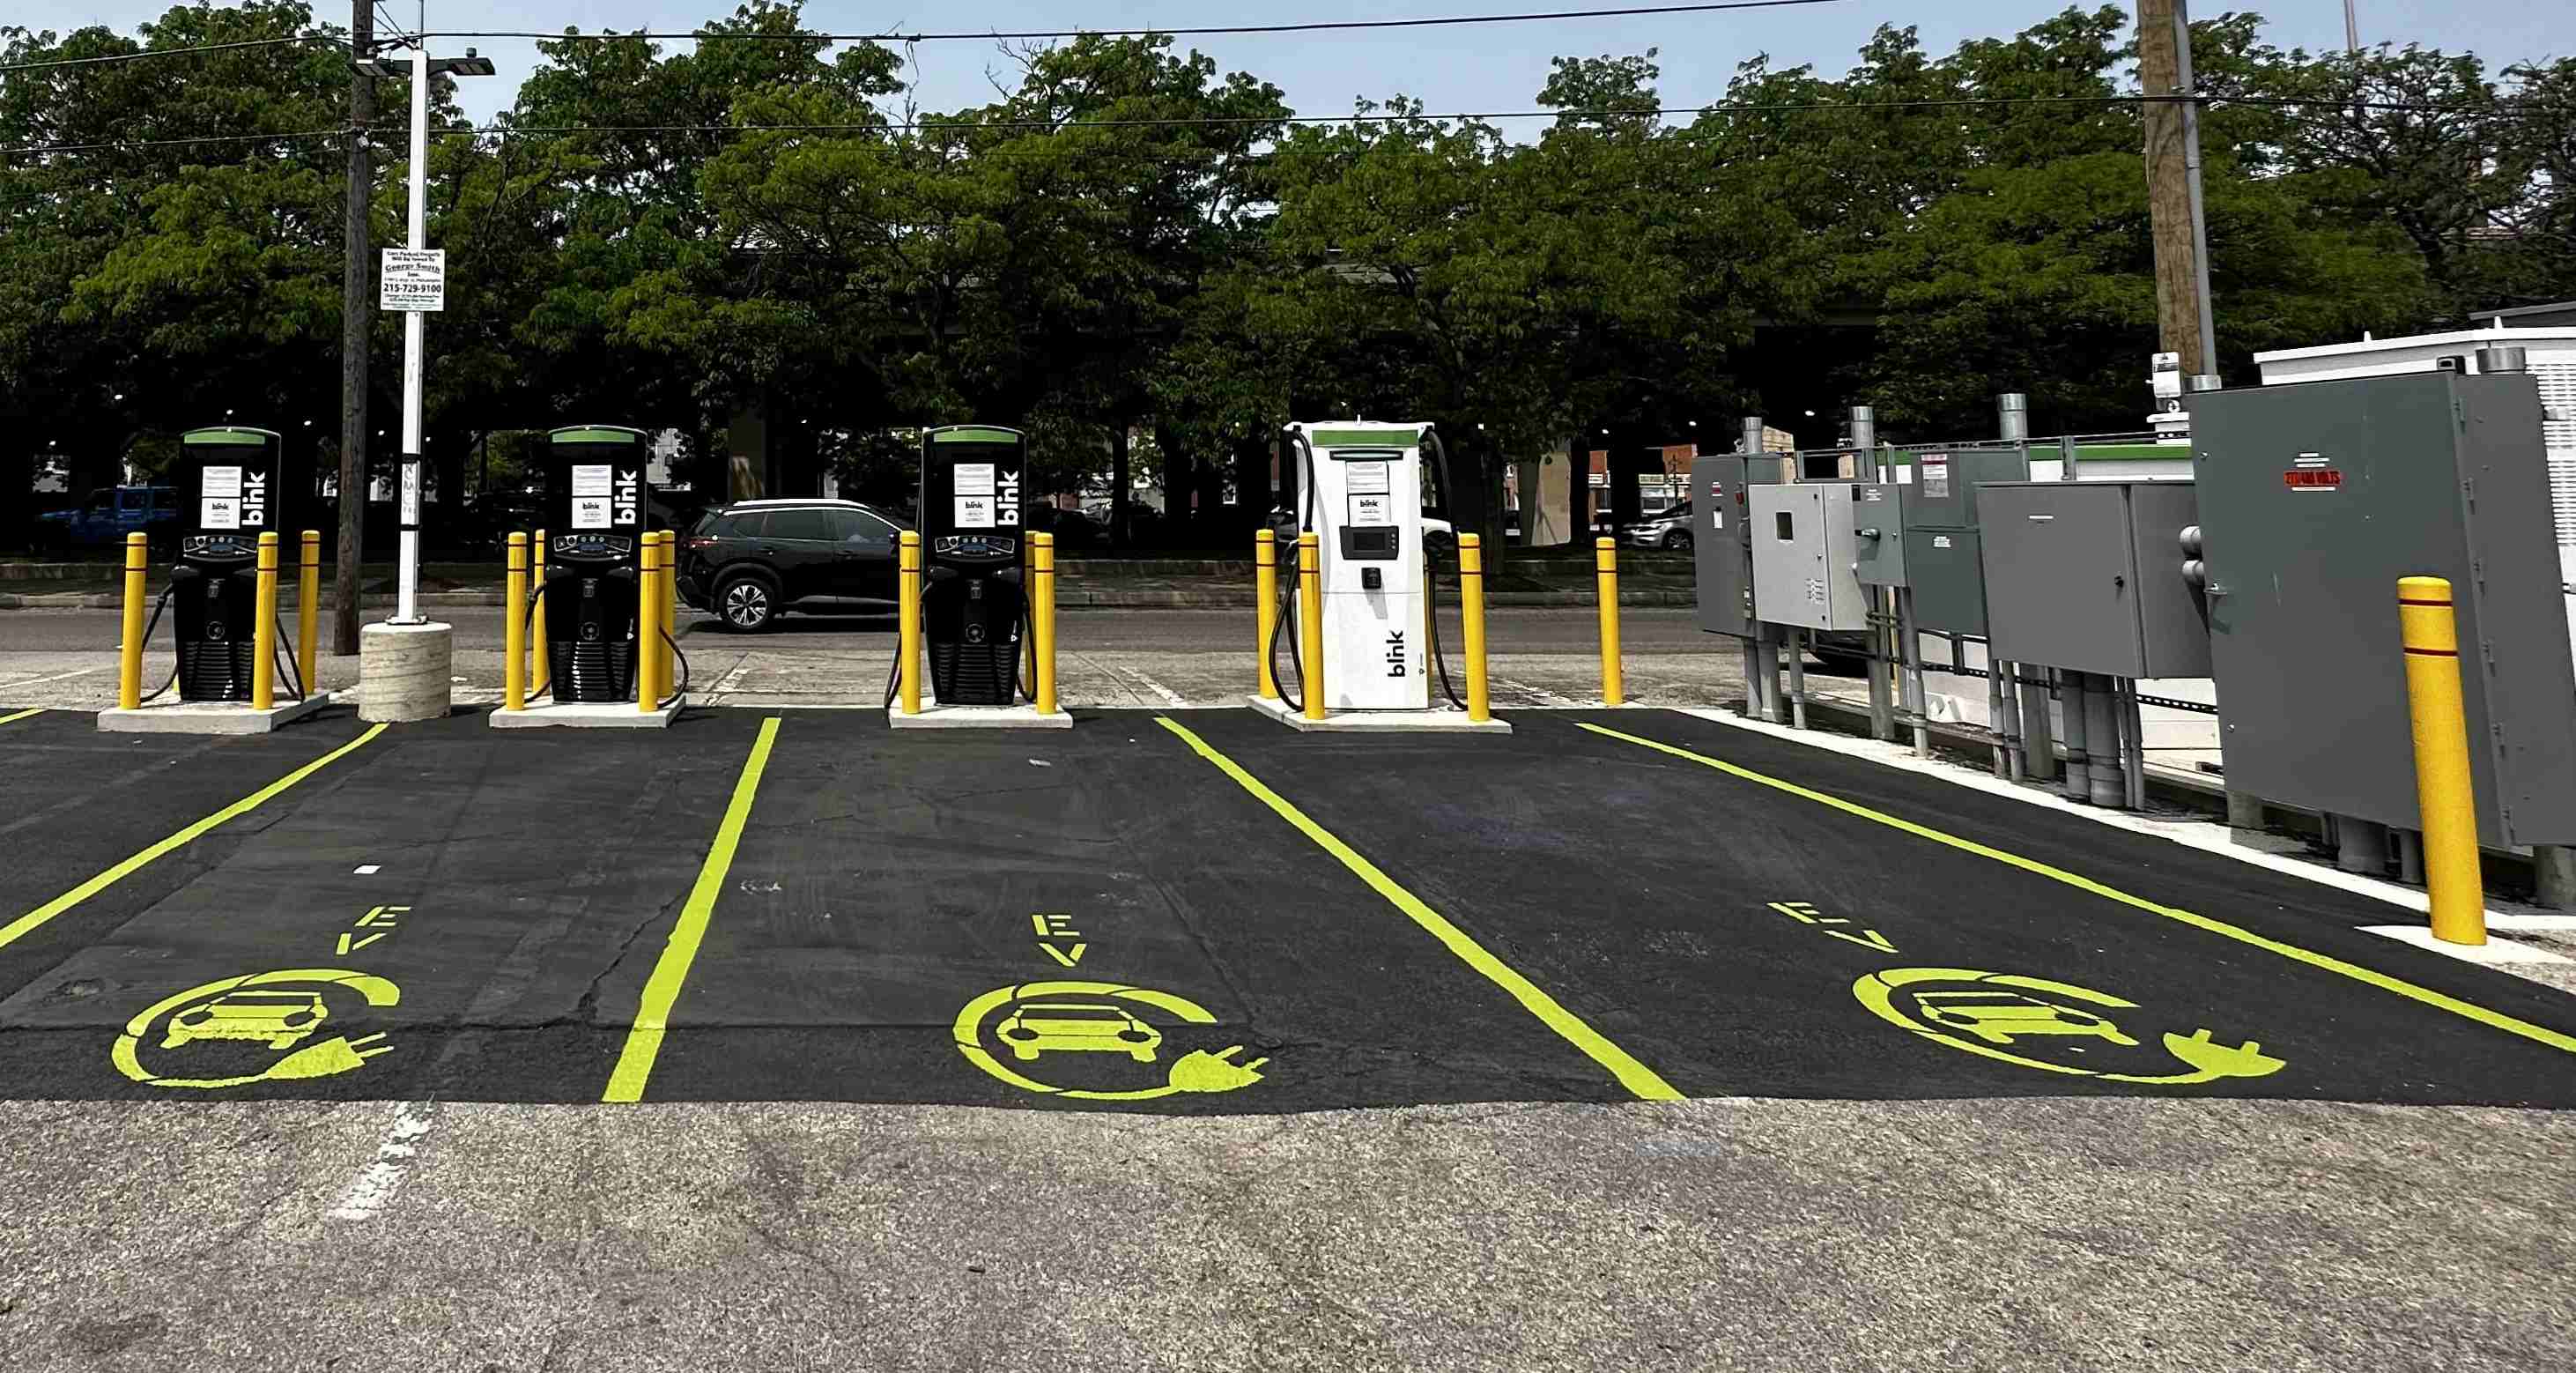 Blink’s new innovative battery energy storage unit will lead to reduction in demand charges and energy costs for electric vehicle drivers and hosts. Photo: Blink Charging